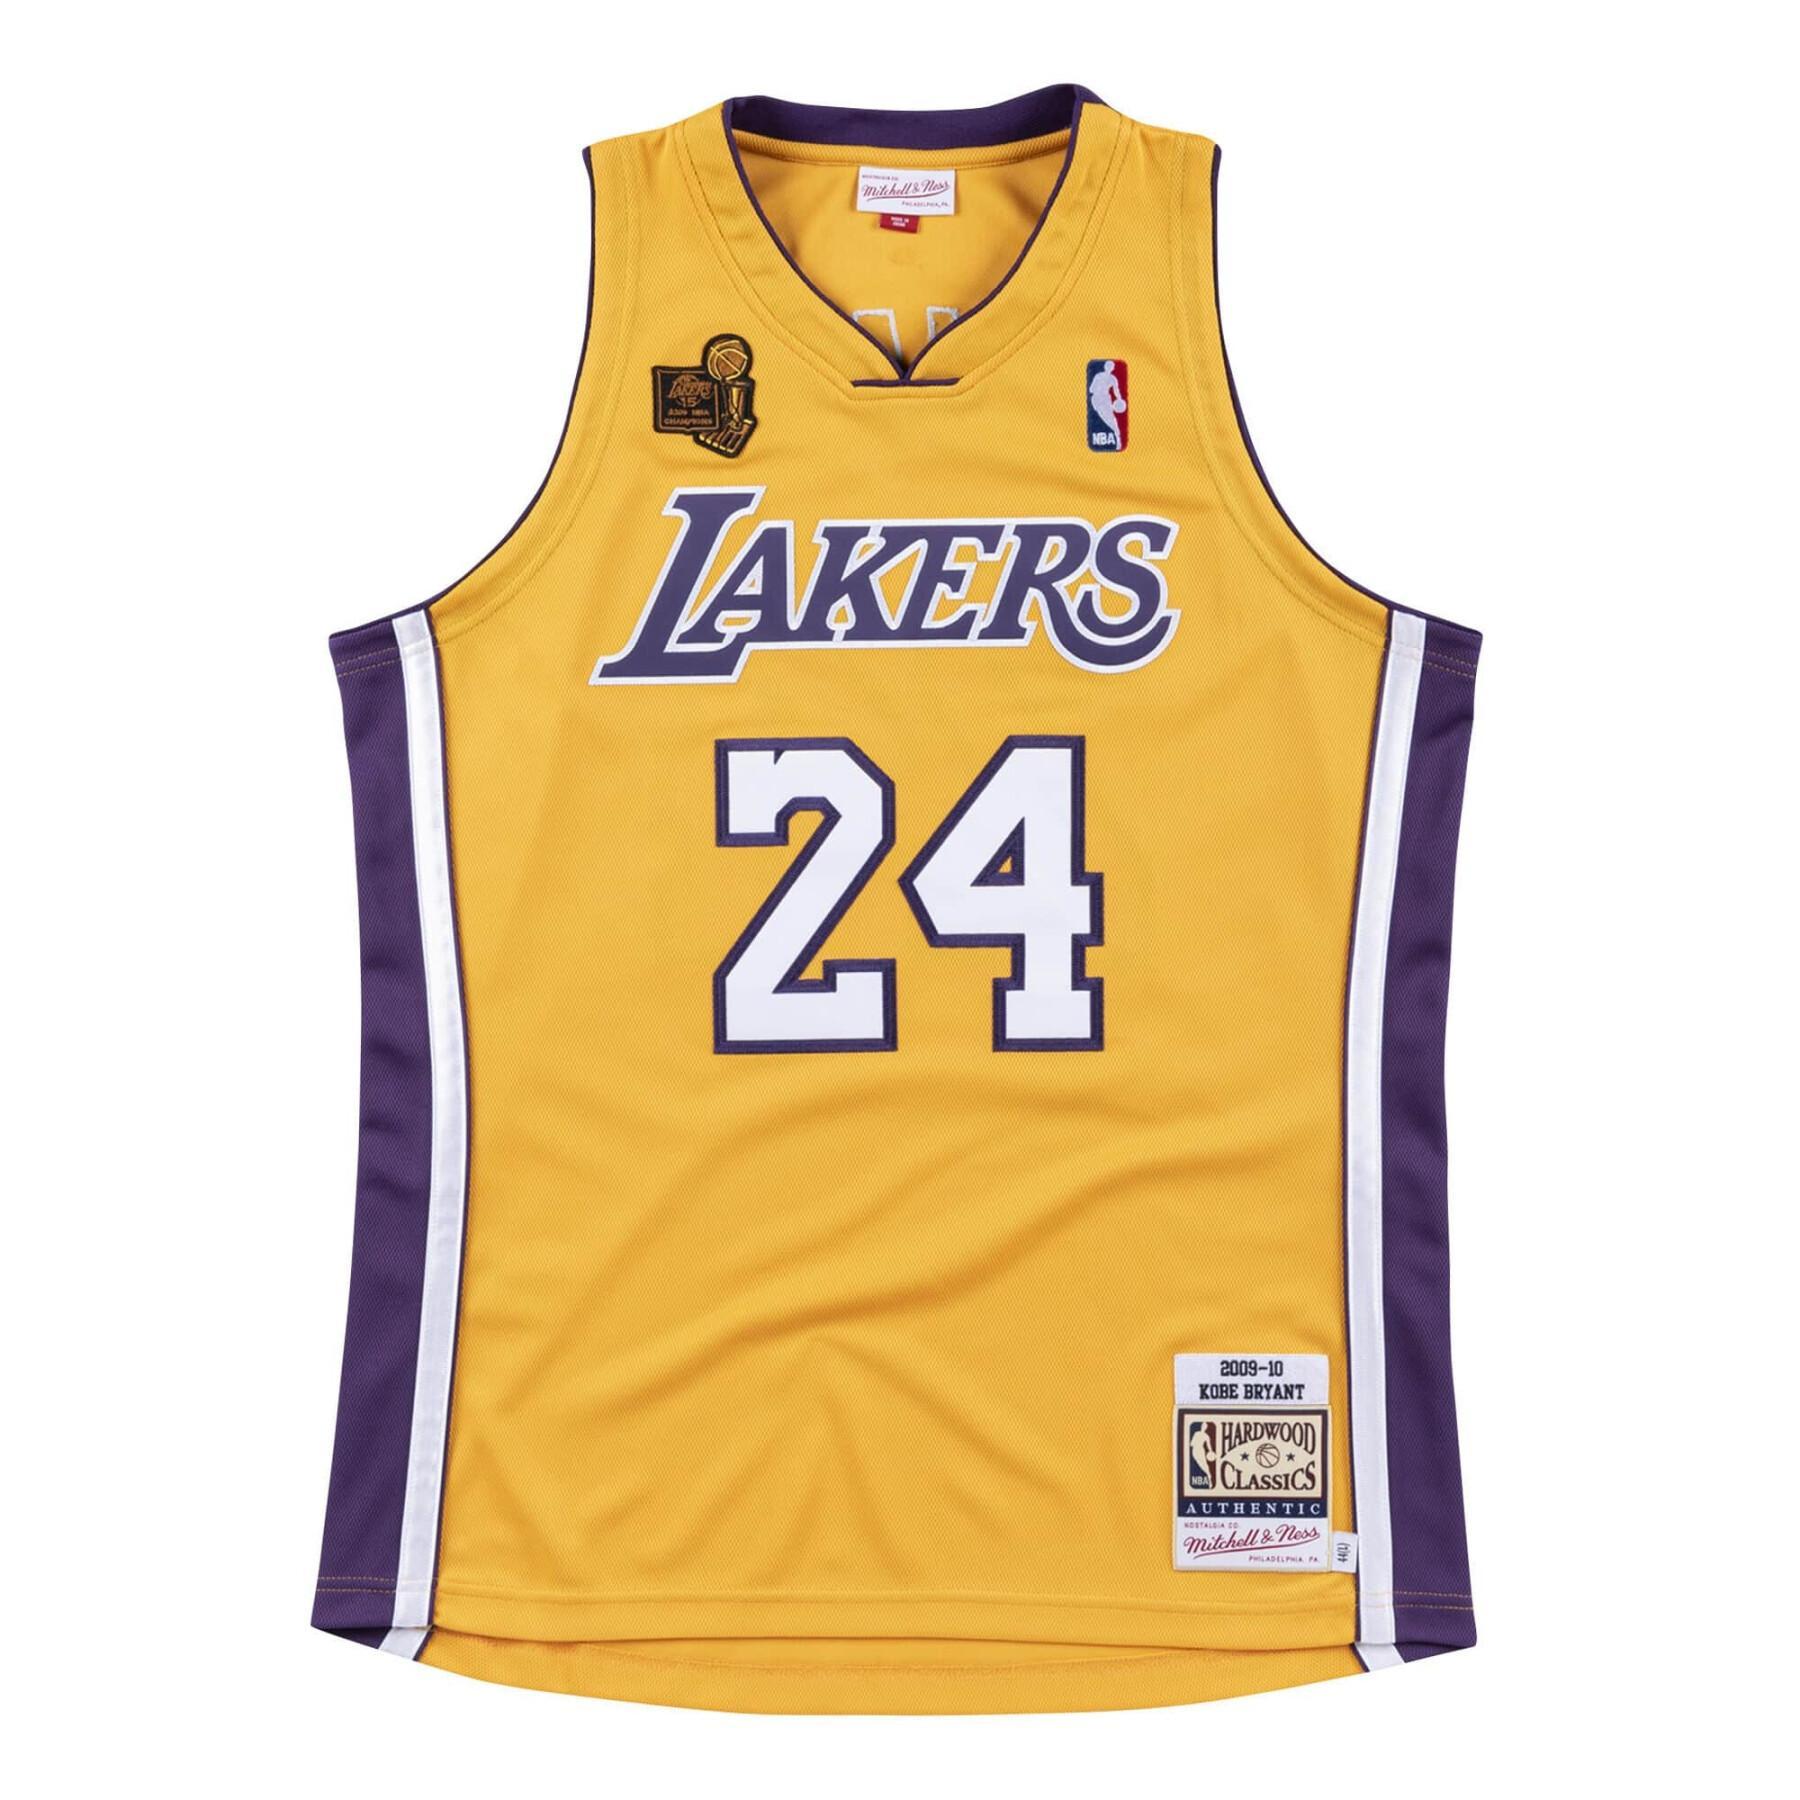 Camisola Authentic Los Angeles Lakers